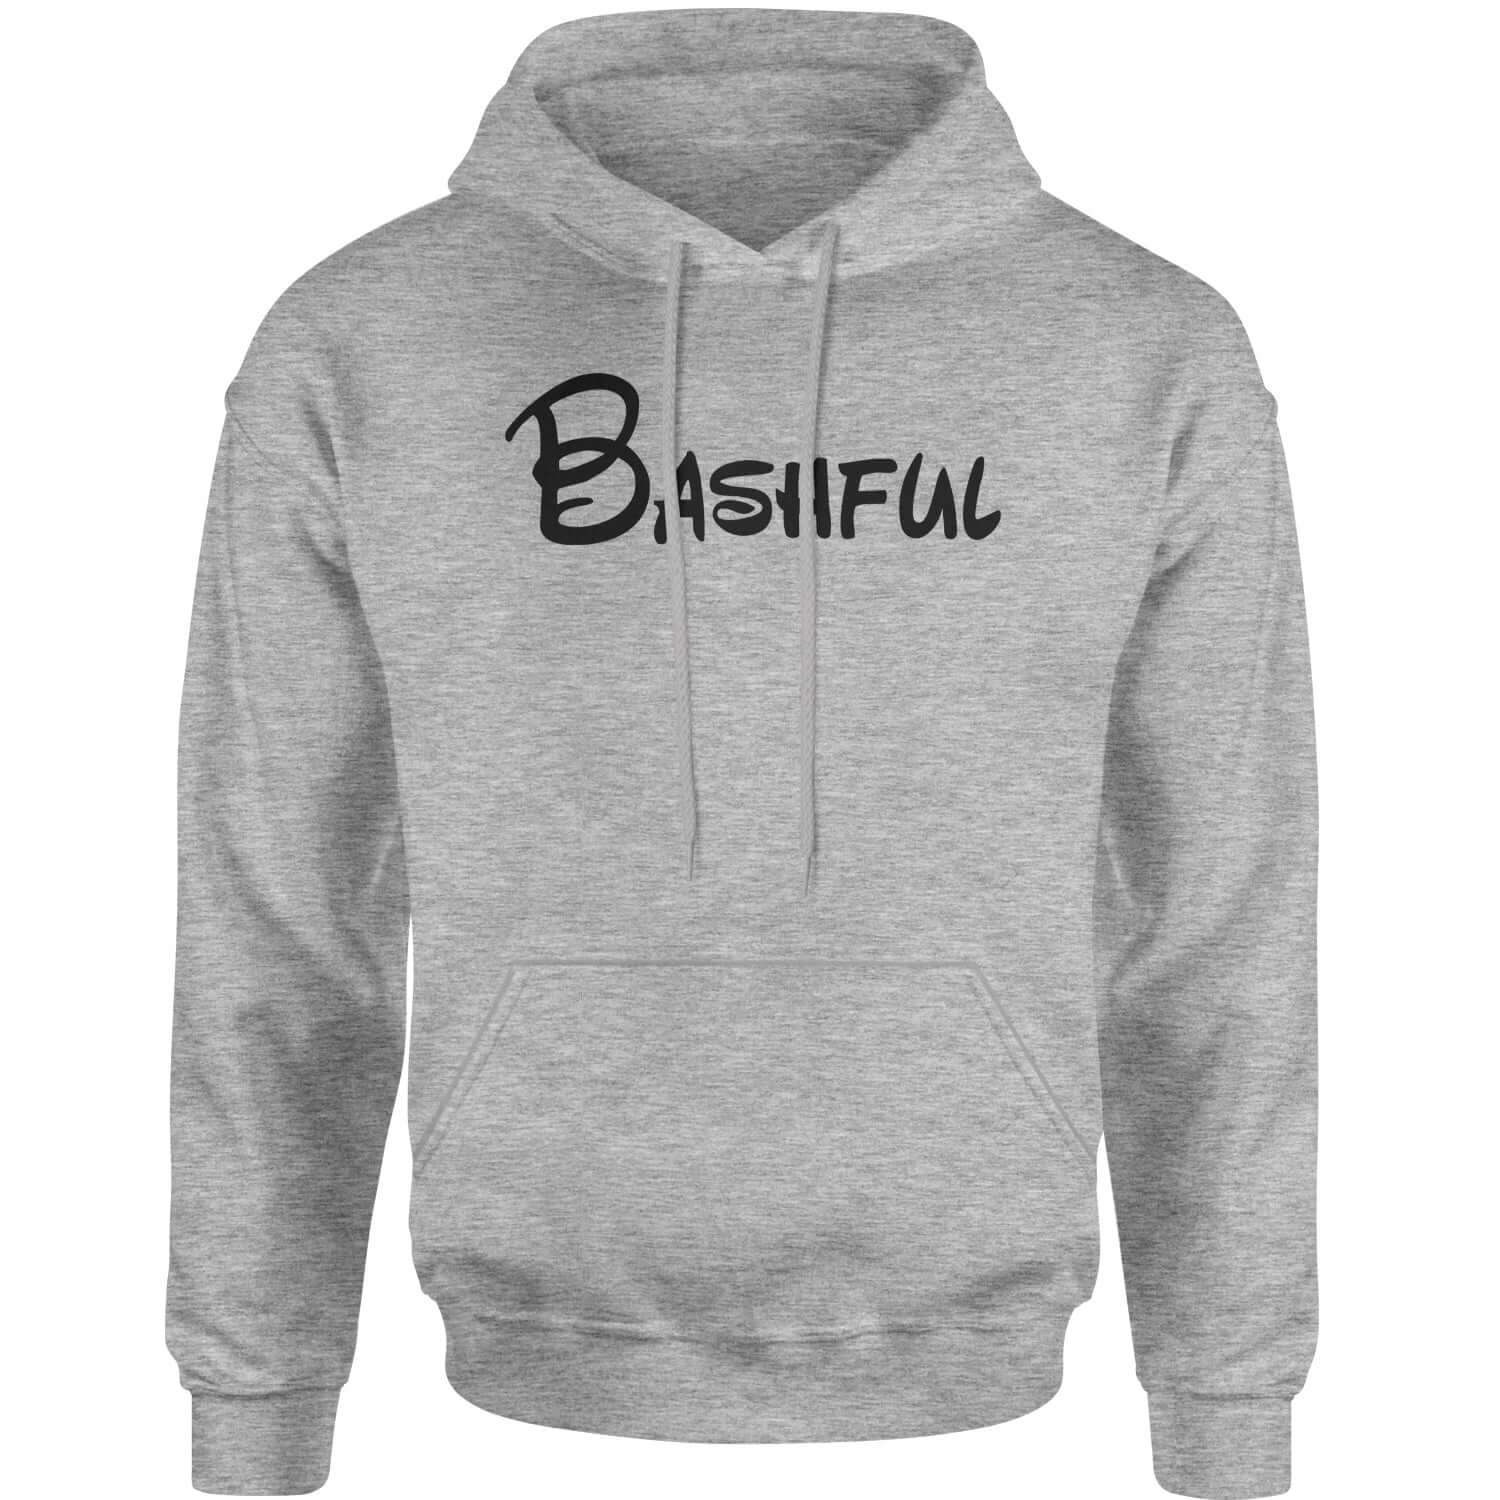 Bashful - 7 Dwarfs Costume Adult Hoodie Sweatshirt and, costume, dwarfs, group, halloween, matching, seven, snow, the, white by Expression Tees